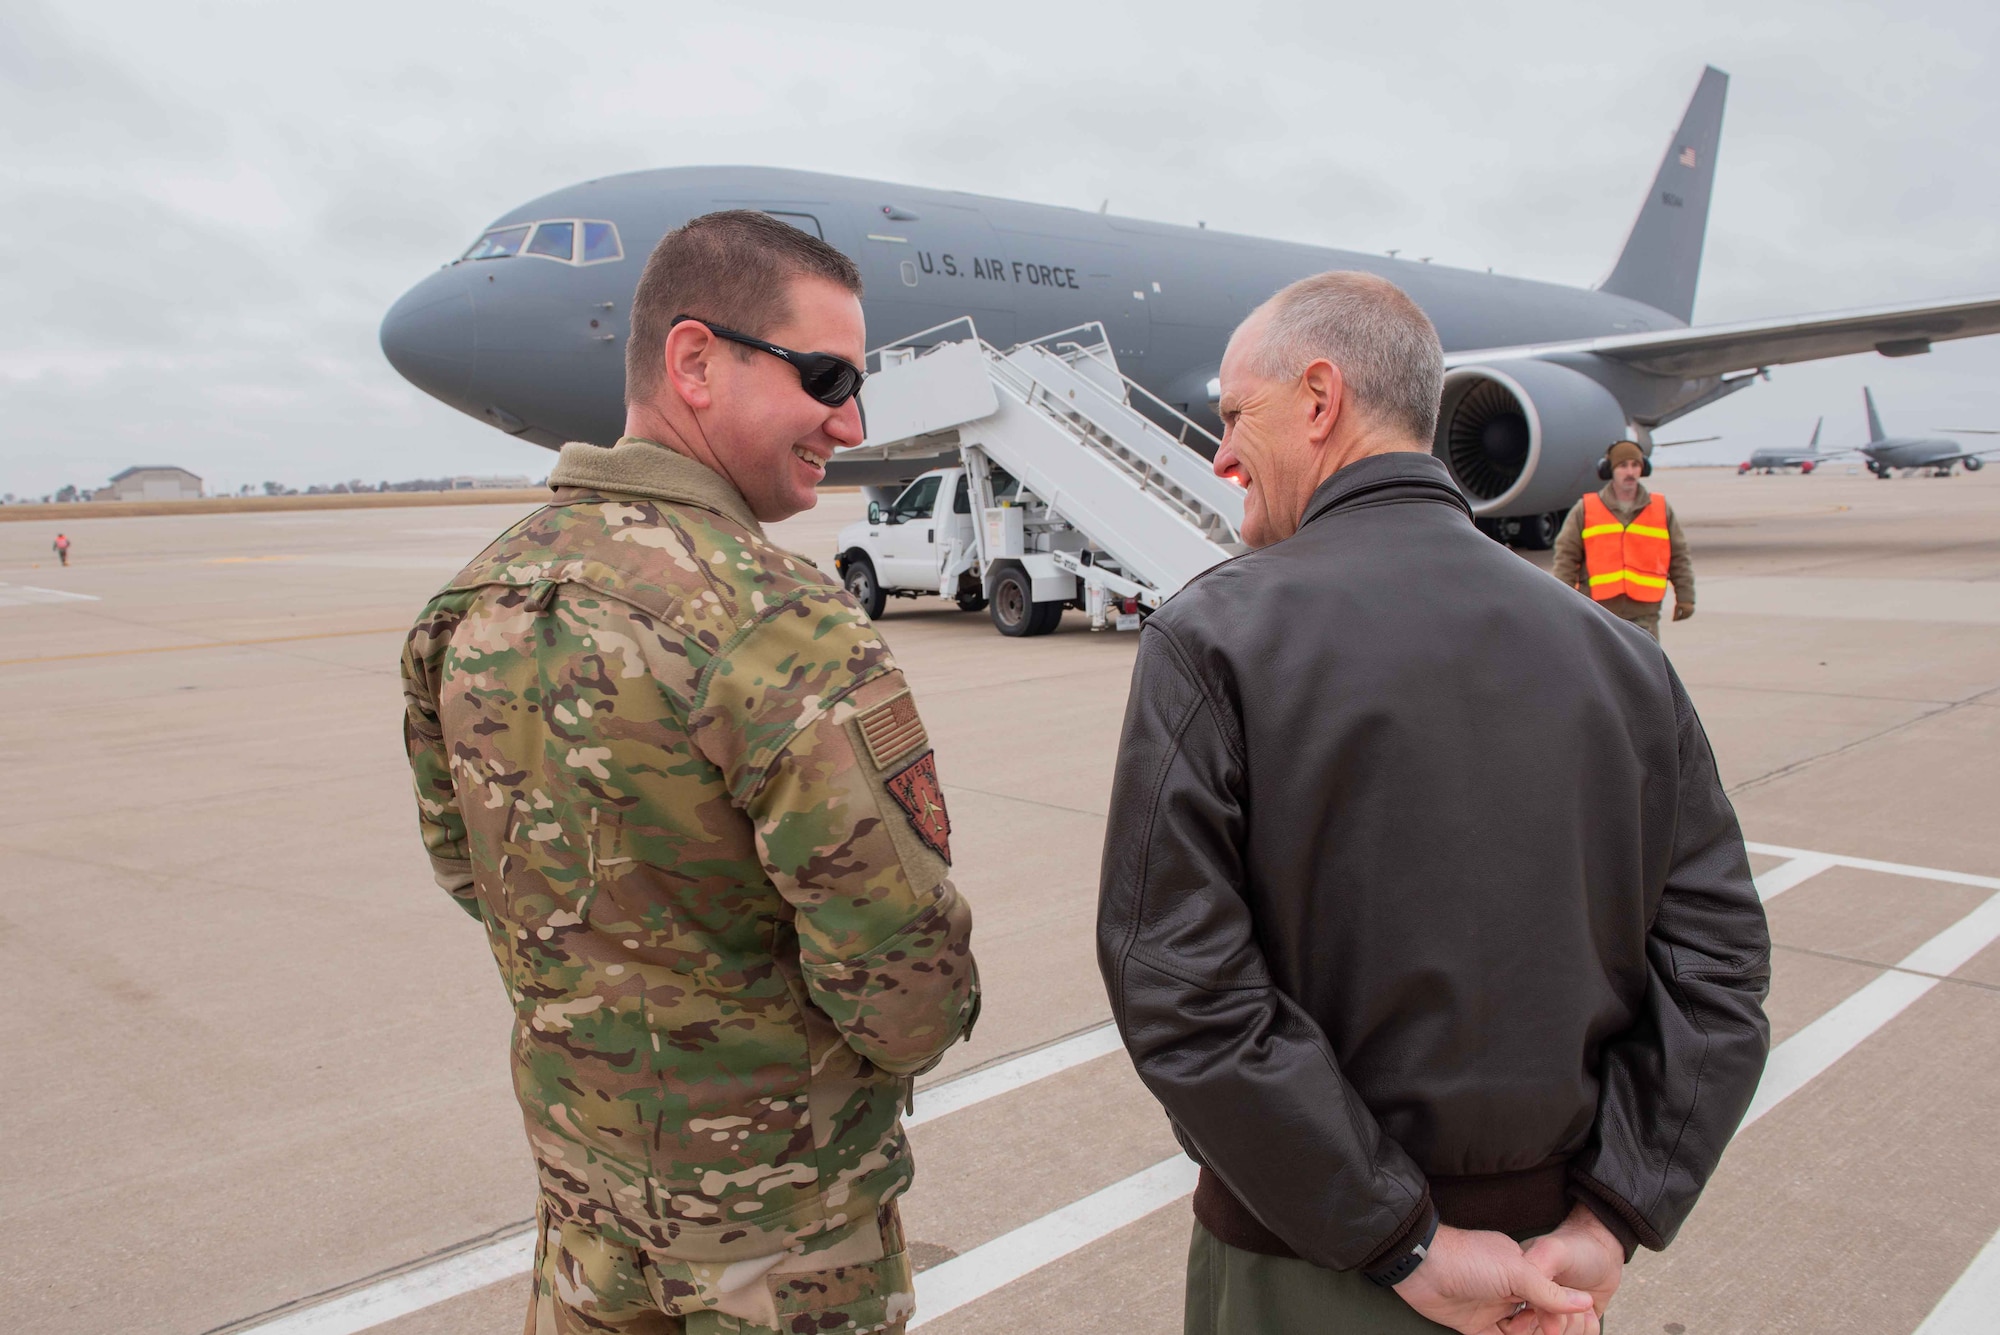 Col. Mark Baran, left, 22nd Air Refueling Wing vice commander, talks with Col. Eric Vitosh, 931st ARW vice commander, while waiting to welcome the aircrew who delivered McConnell’s 17th KC-46 Pegasus Nov. 22, 2019, at McConnell Air Force Base, Kan. McConnell has 19 KC-46s, the Air Force’s newest aircraft, which is the future of aerial refueling. (U.S. Air Force photo by Staff Sgt. Chris Thornbury)